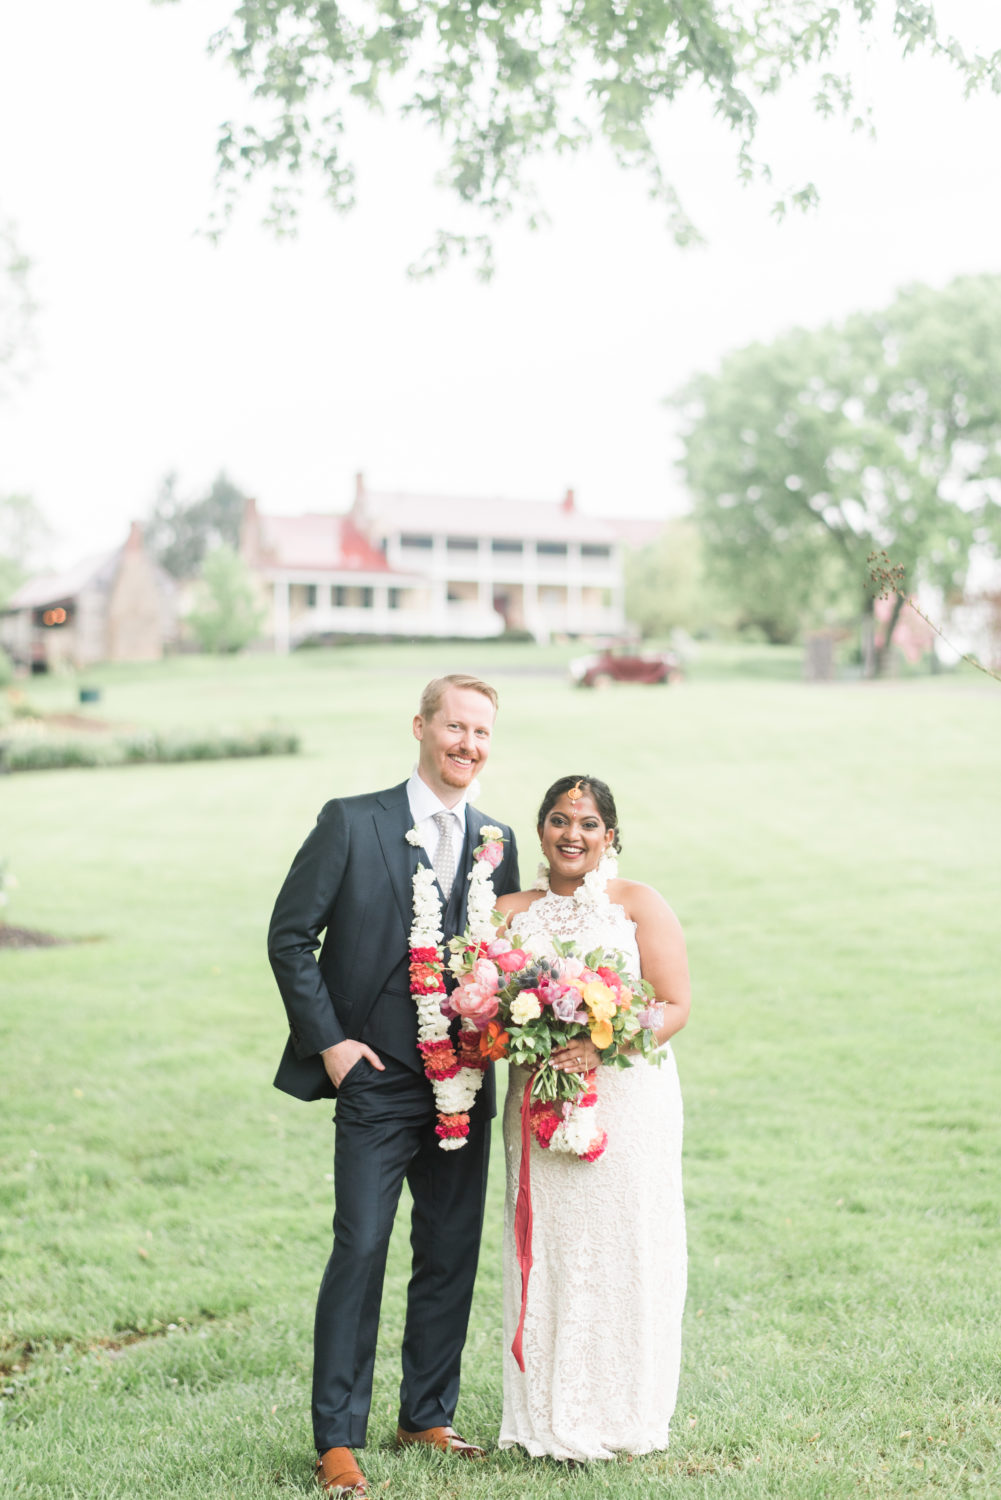 Luck & Love Photography // L&L Events Wedding Planners // Riverside On The Potomac Wedding, Leesburg Virginia